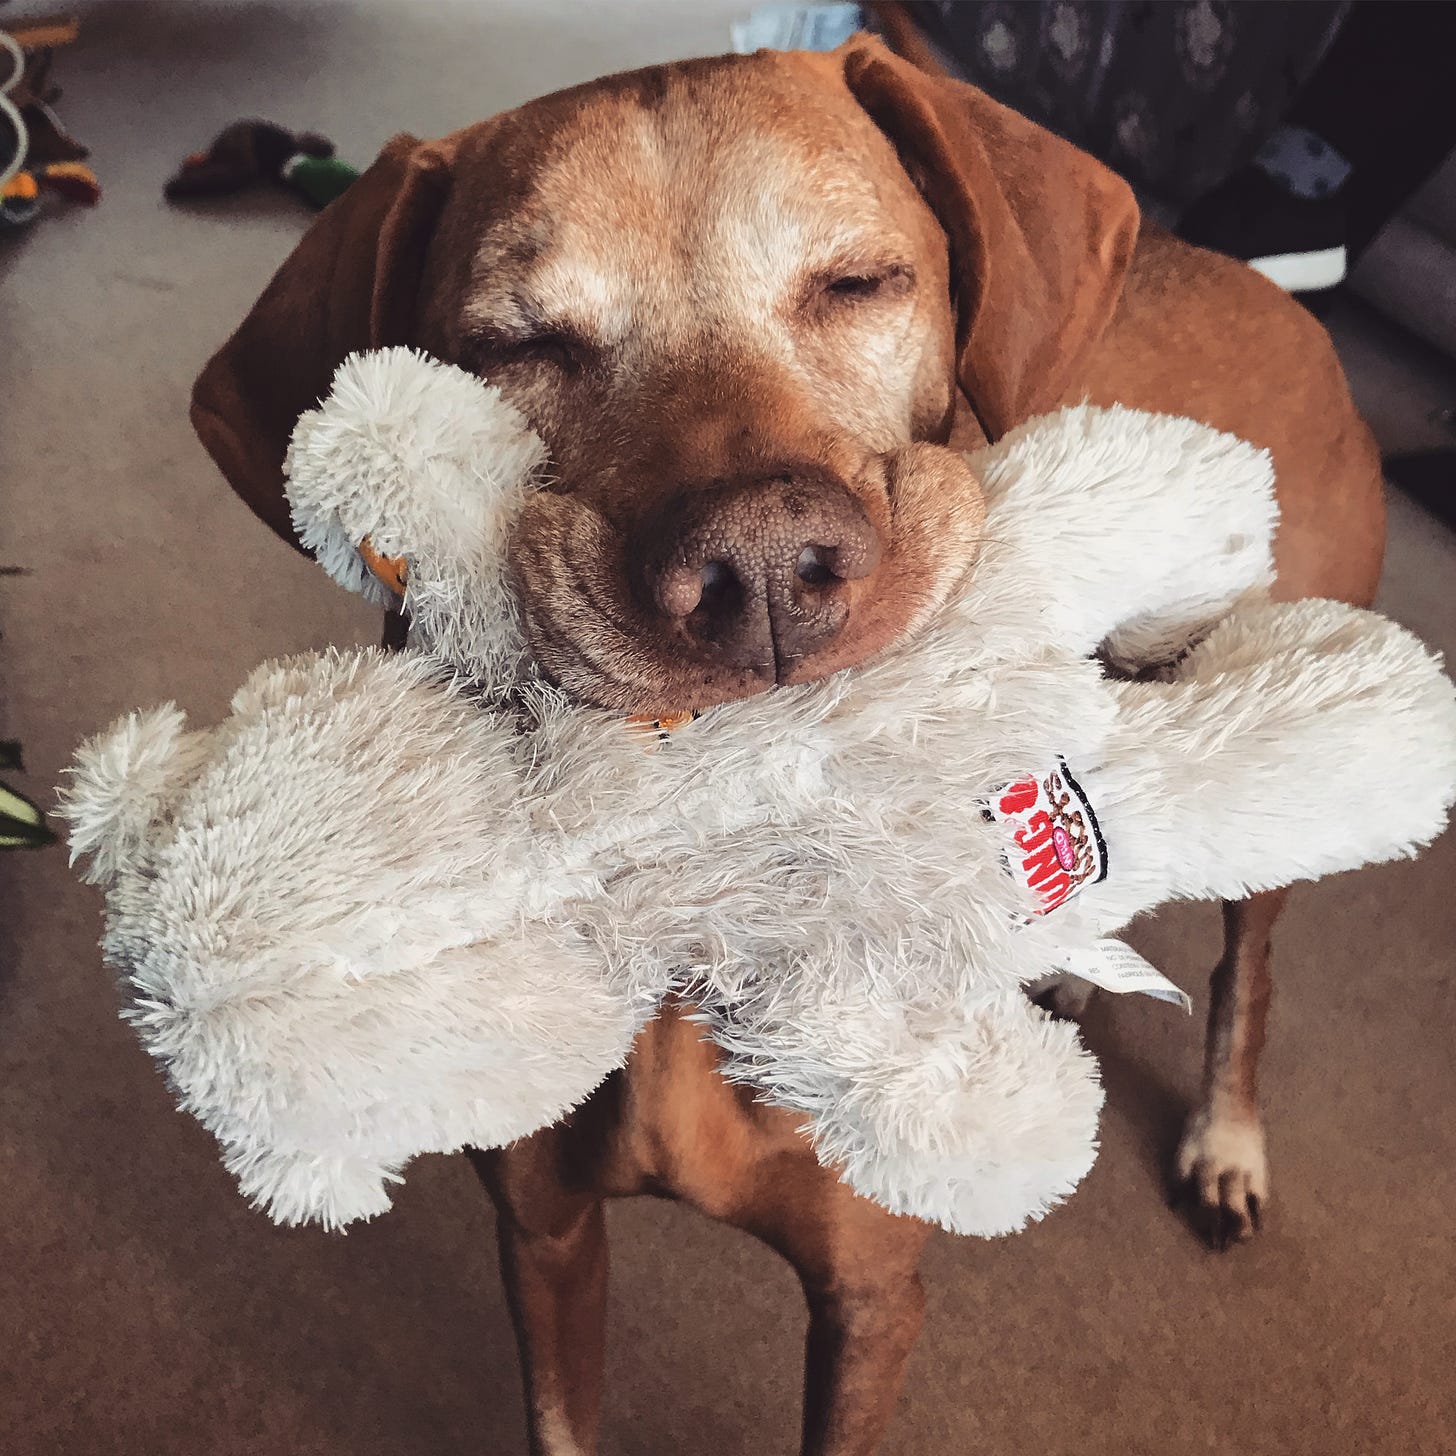 Bowie, a ginger vizsla dog, his face a little white with age, holding a pale grey stuffed bear in his mouth with an expression of contentment